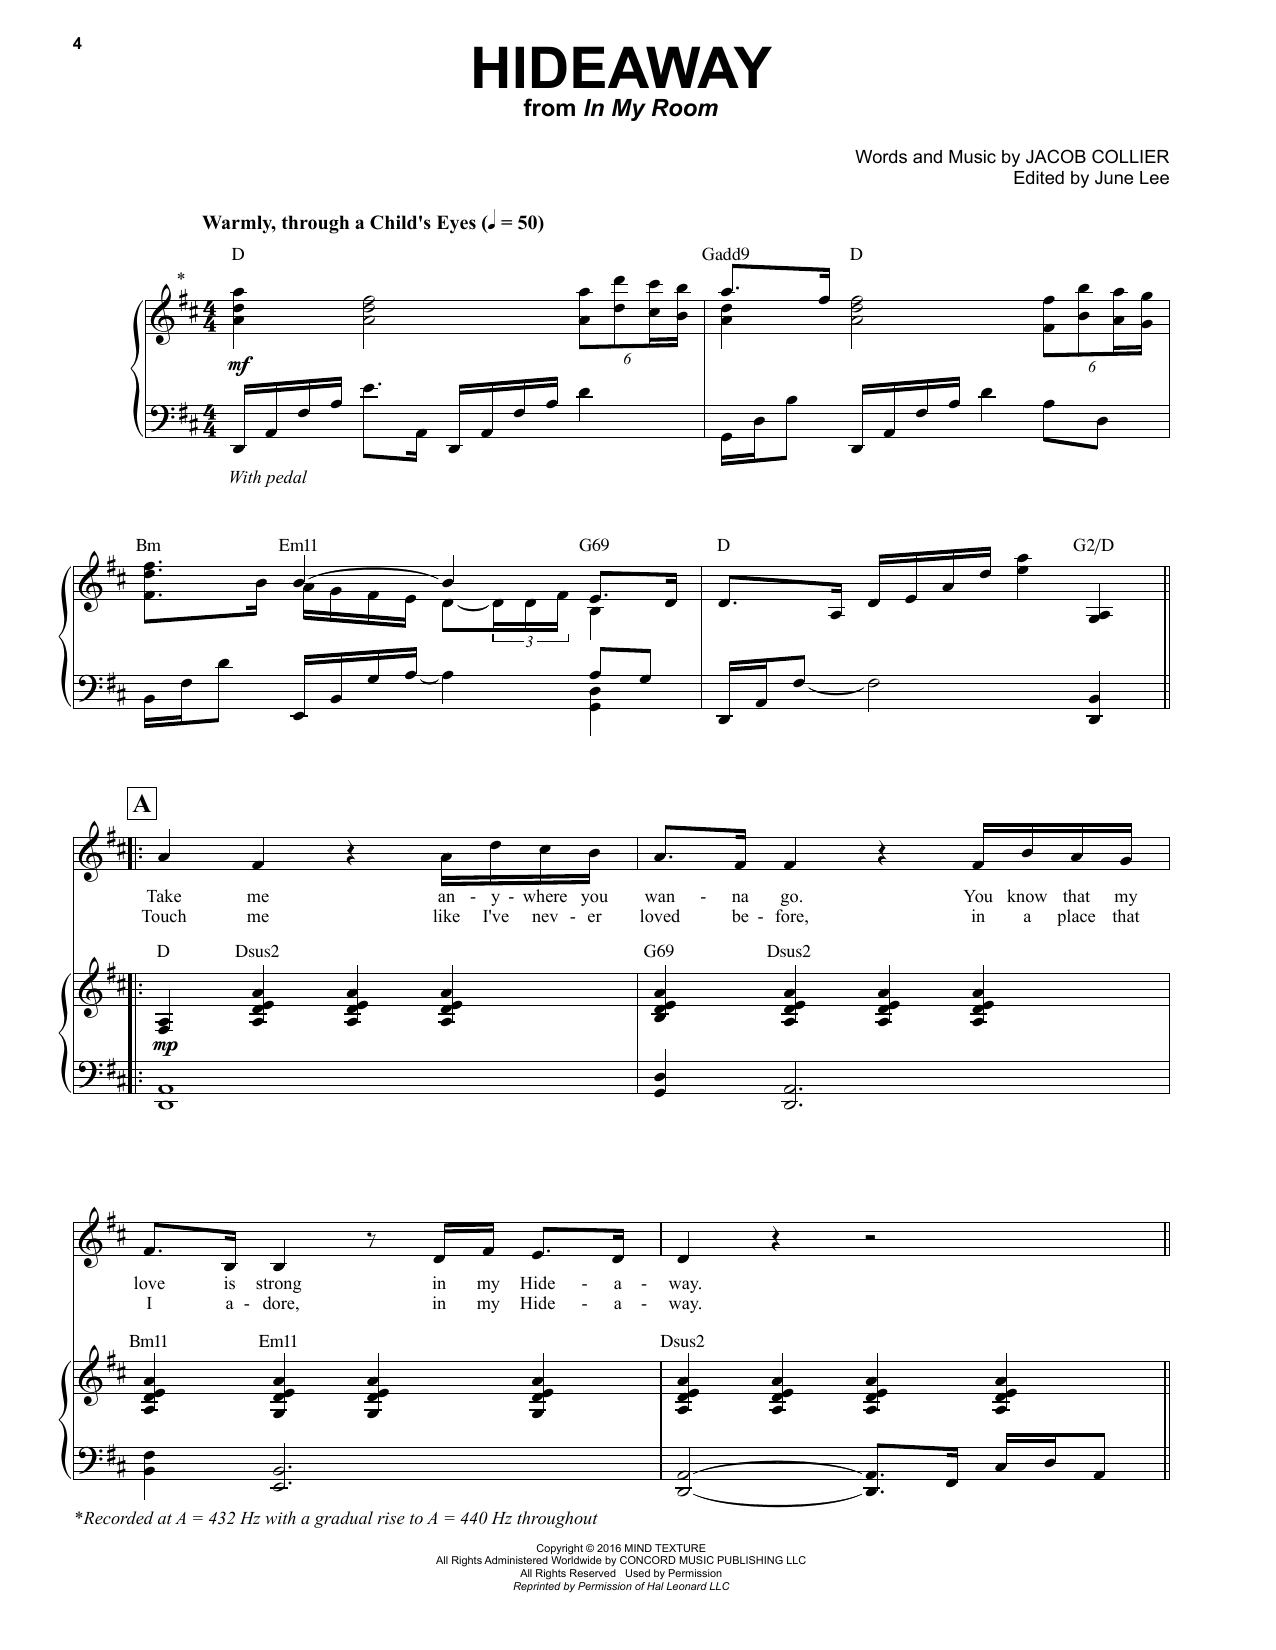 Jacob Collier Songs of Jacob Collier (19 song collection) sheet music notes printable PDF score